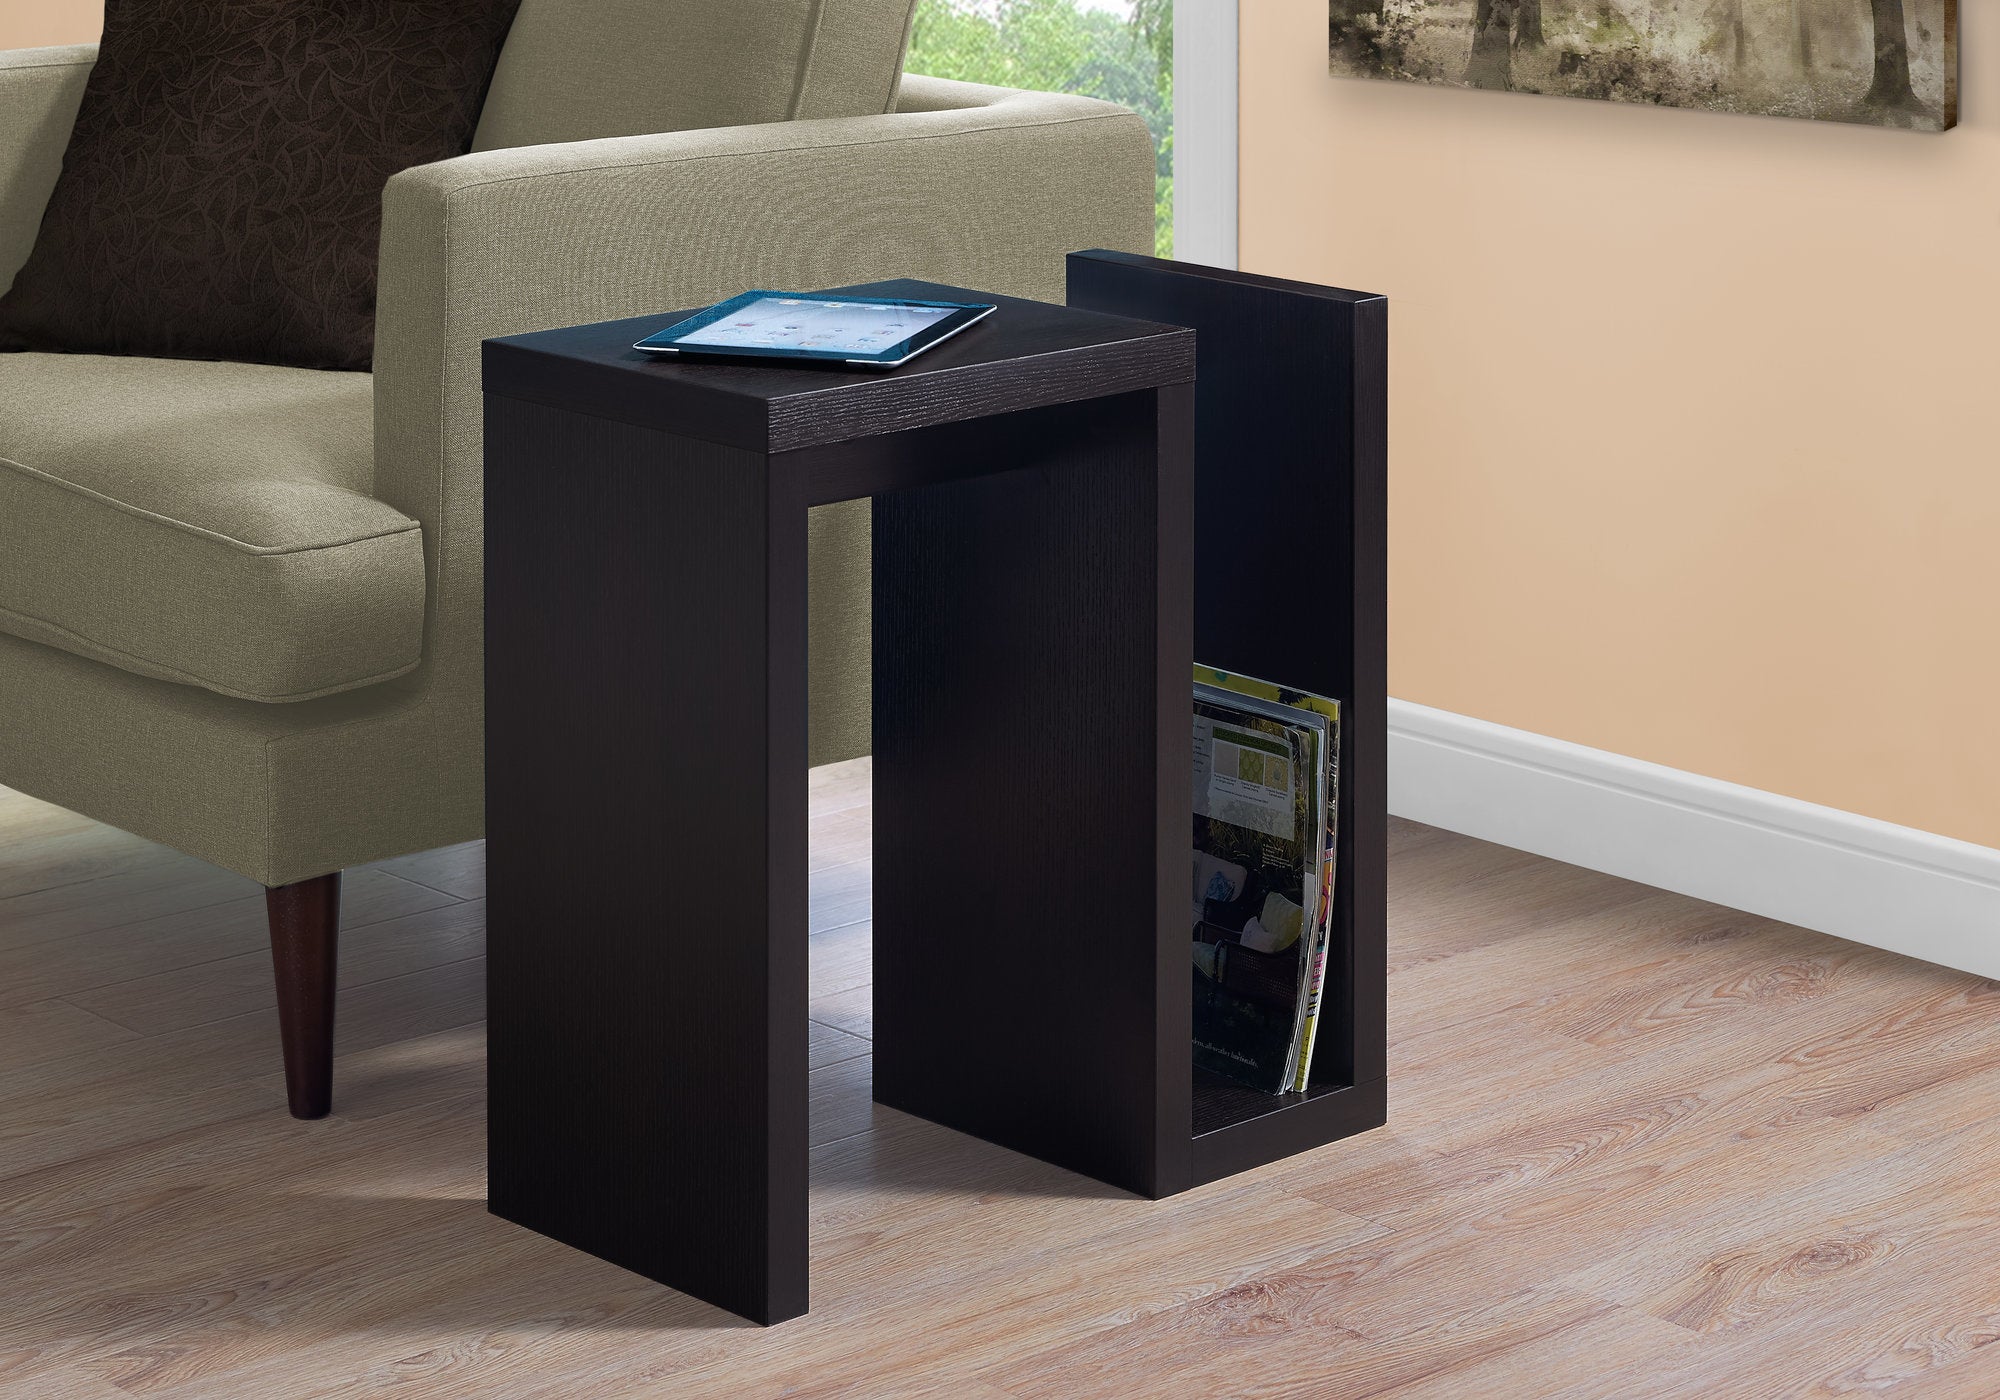 MN-912089    Accent Table, Side, End, Narrow, Small, Living Room, Bedroom, Laminate, Dark Brown, Contemporary, Modern